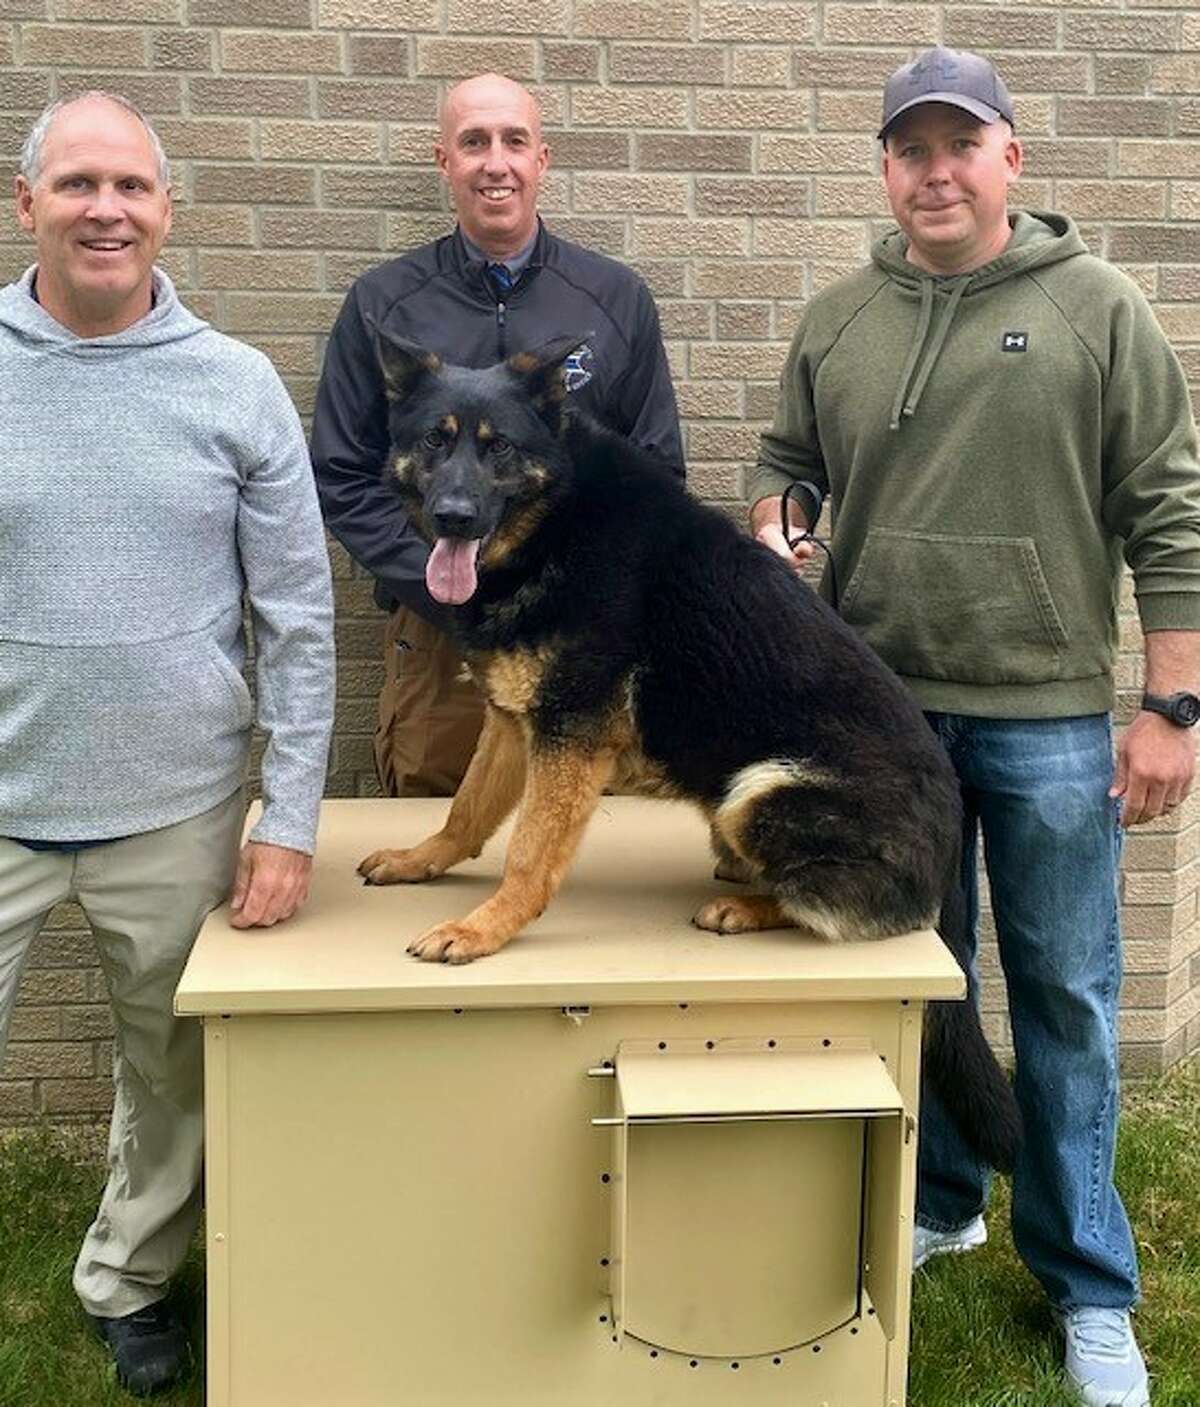 The Mecosta County Sheriff's Department recently underwent a transition of handlers. Sgt. Charlie Pippin (pictured far left) has taken possession of K-9 Zeke from his former handler and has begun training to ease both of them into their new working relationship.  